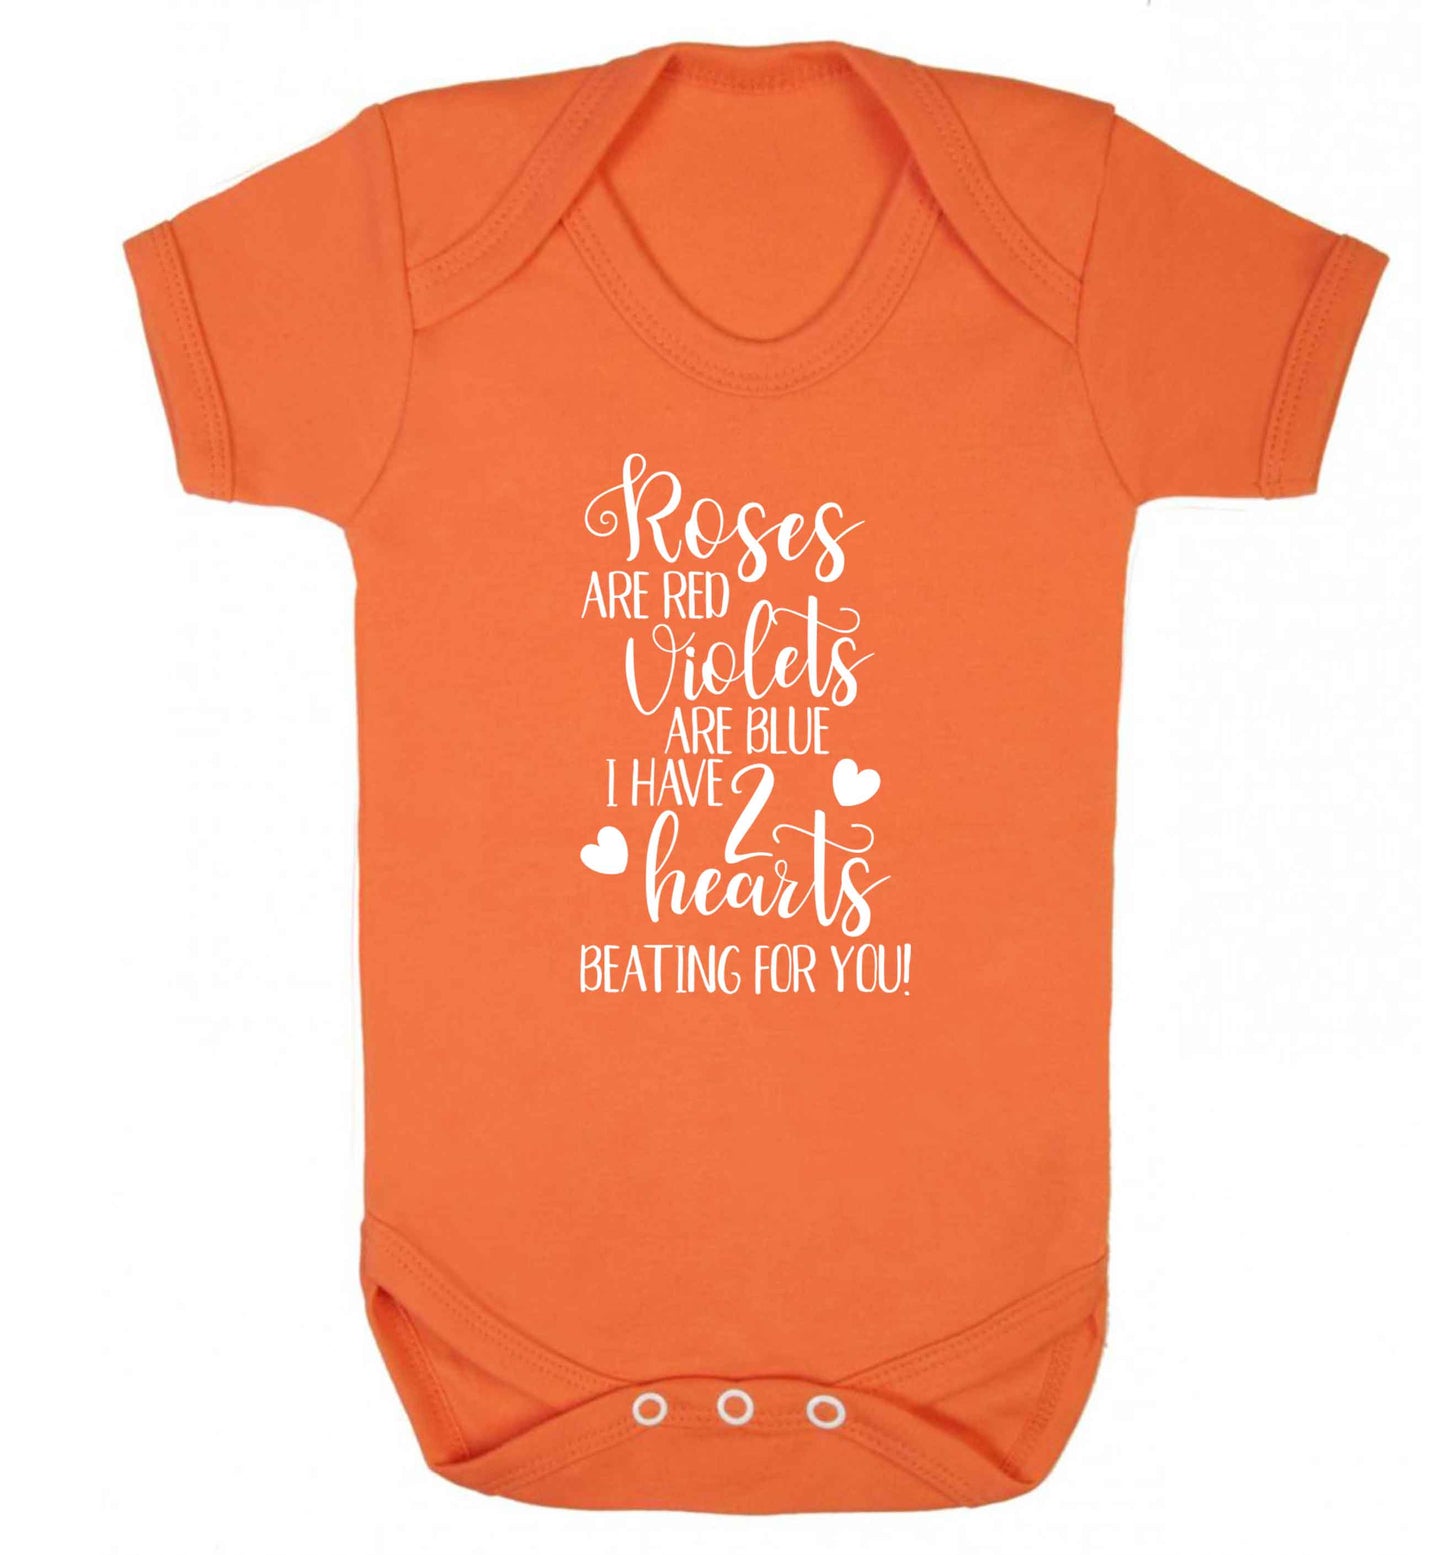 Roses are red violets are blue I have two hearts beating for you Baby Vest orange 18-24 months